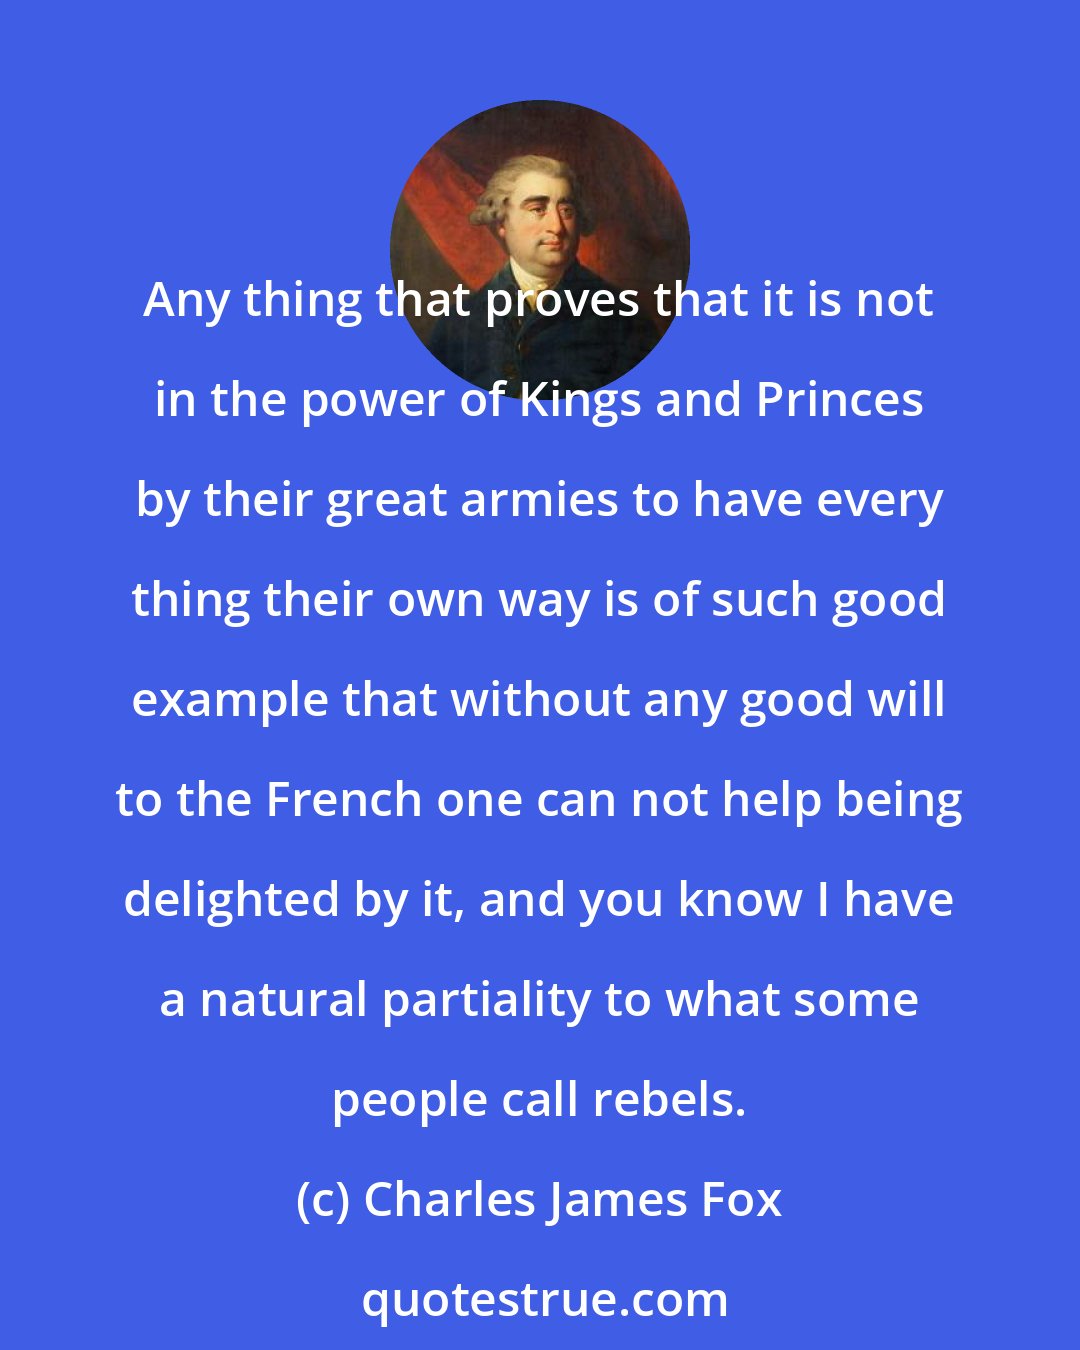 Charles James Fox: Any thing that proves that it is not in the power of Kings and Princes by their great armies to have every thing their own way is of such good example that without any good will to the French one can not help being delighted by it, and you know I have a natural partiality to what some people call rebels.